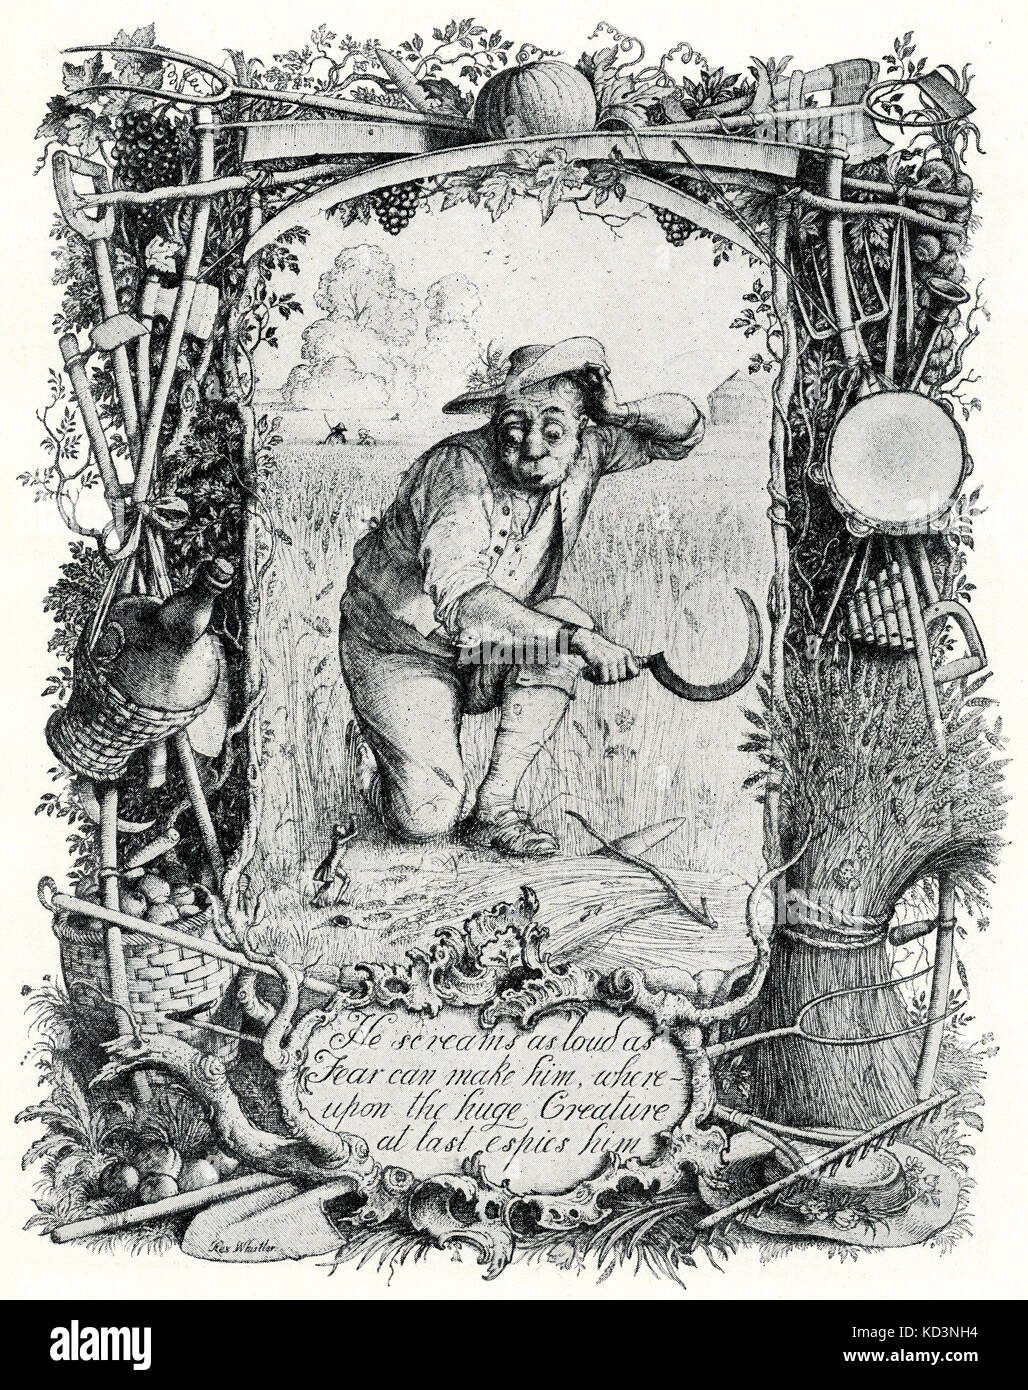 Gulliver's Travels Part II, chaper I: 'A Voyage to Brobdingnag'. Gulliver is very small and about to be picked up by farmer. Caption reads : He screams as loud as Fear canmake him, whereupon the huge creature at last espies him'. Illustration by Rex Whistler.  Full title' Gulliver's Travels, whose full title is Travels into Several Remote Nations of the World. In Four Parts. By Lemuel Gulliver, First a Surgeon, and then a Captain of Several Ships', (1726, amended 1735). JS: 30 November 1667 – 19 October 1745. Stock Photo